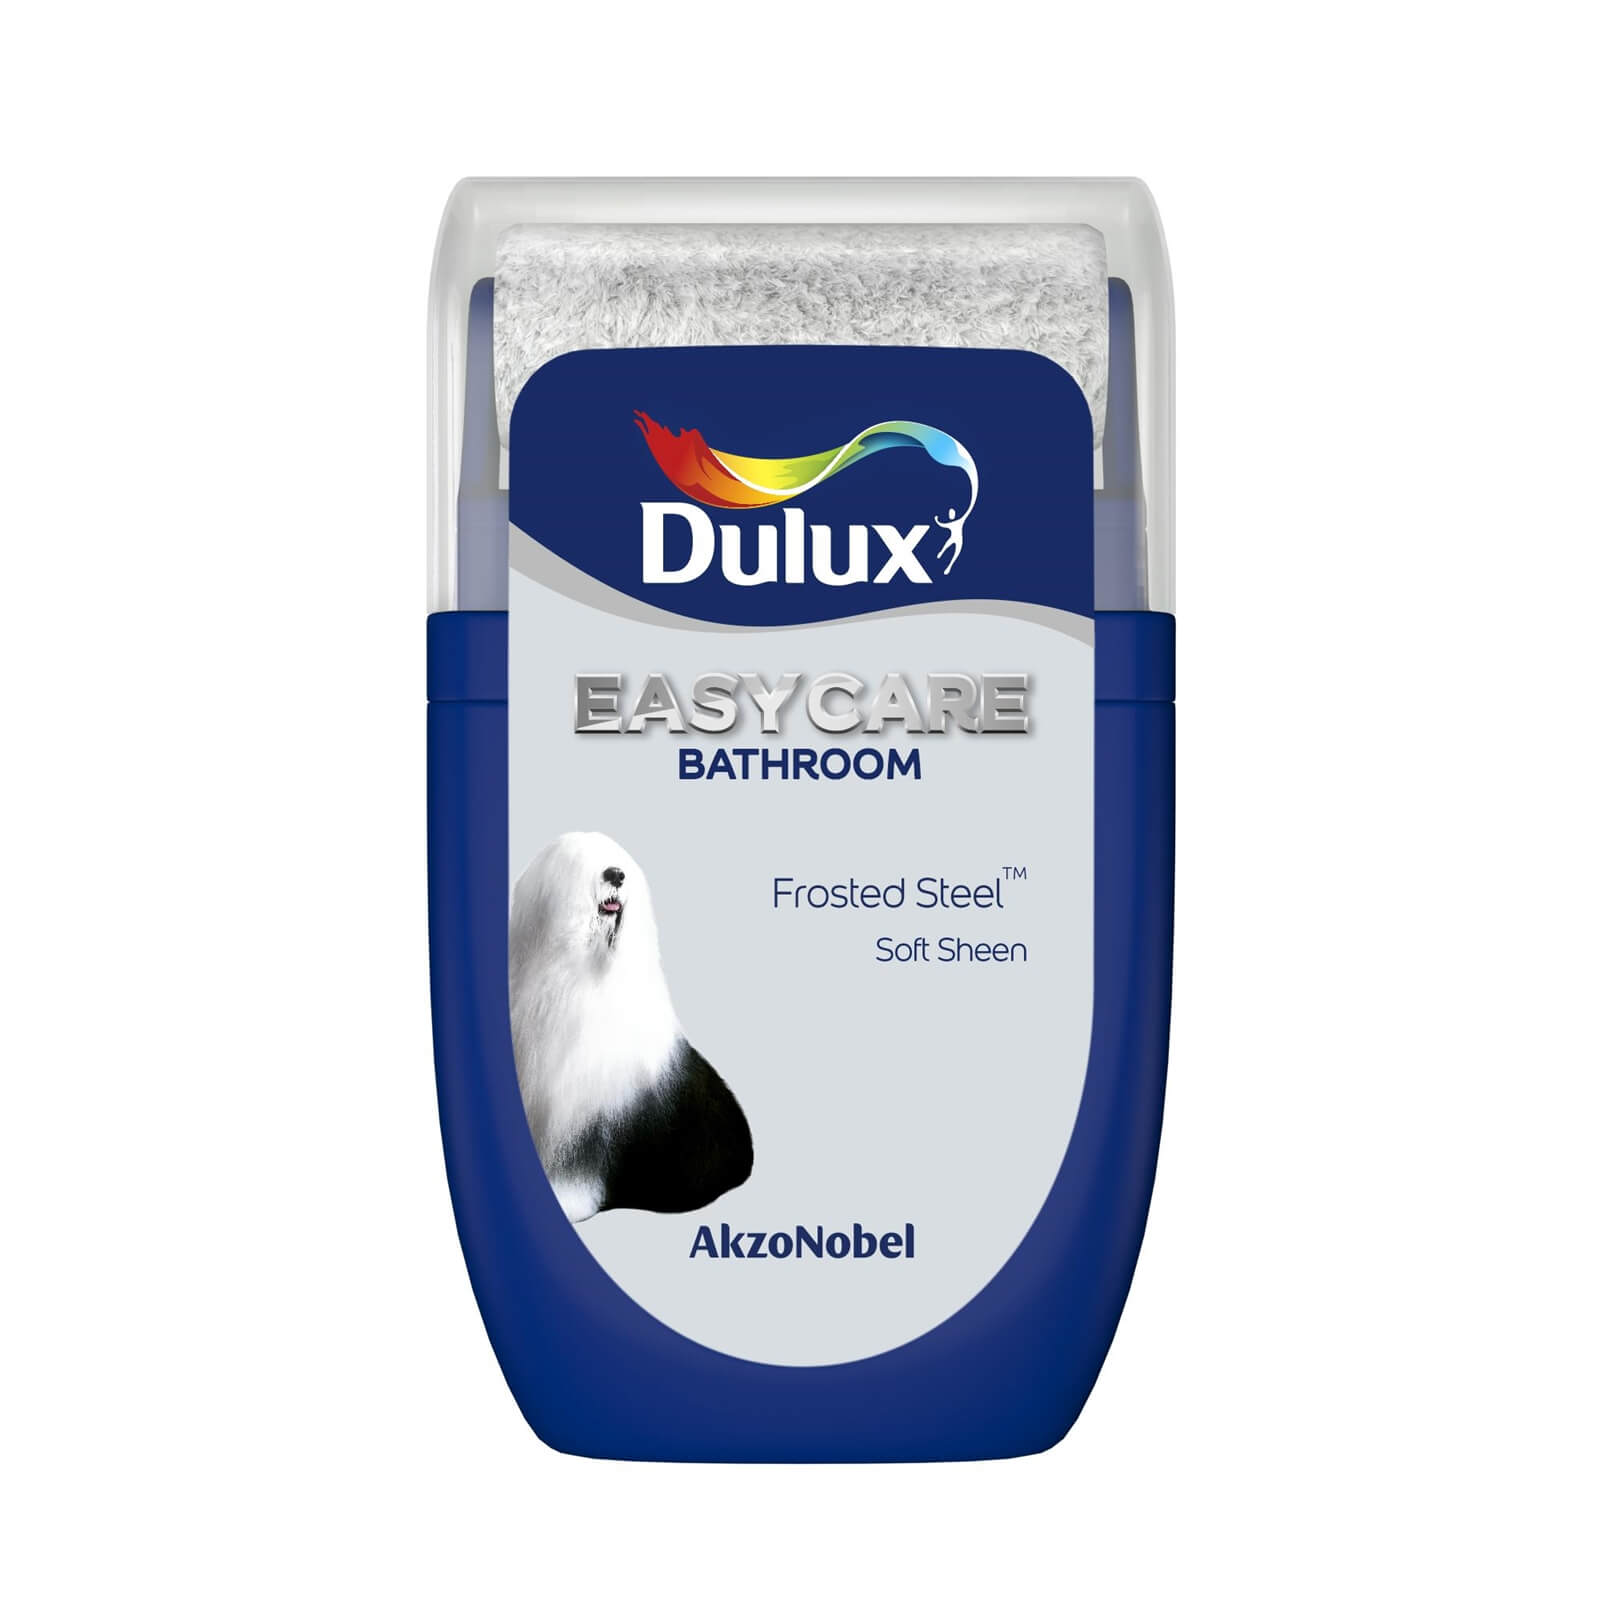 Dulux Easycare Bathroom Frosted Steel Tester Paint - 30ml